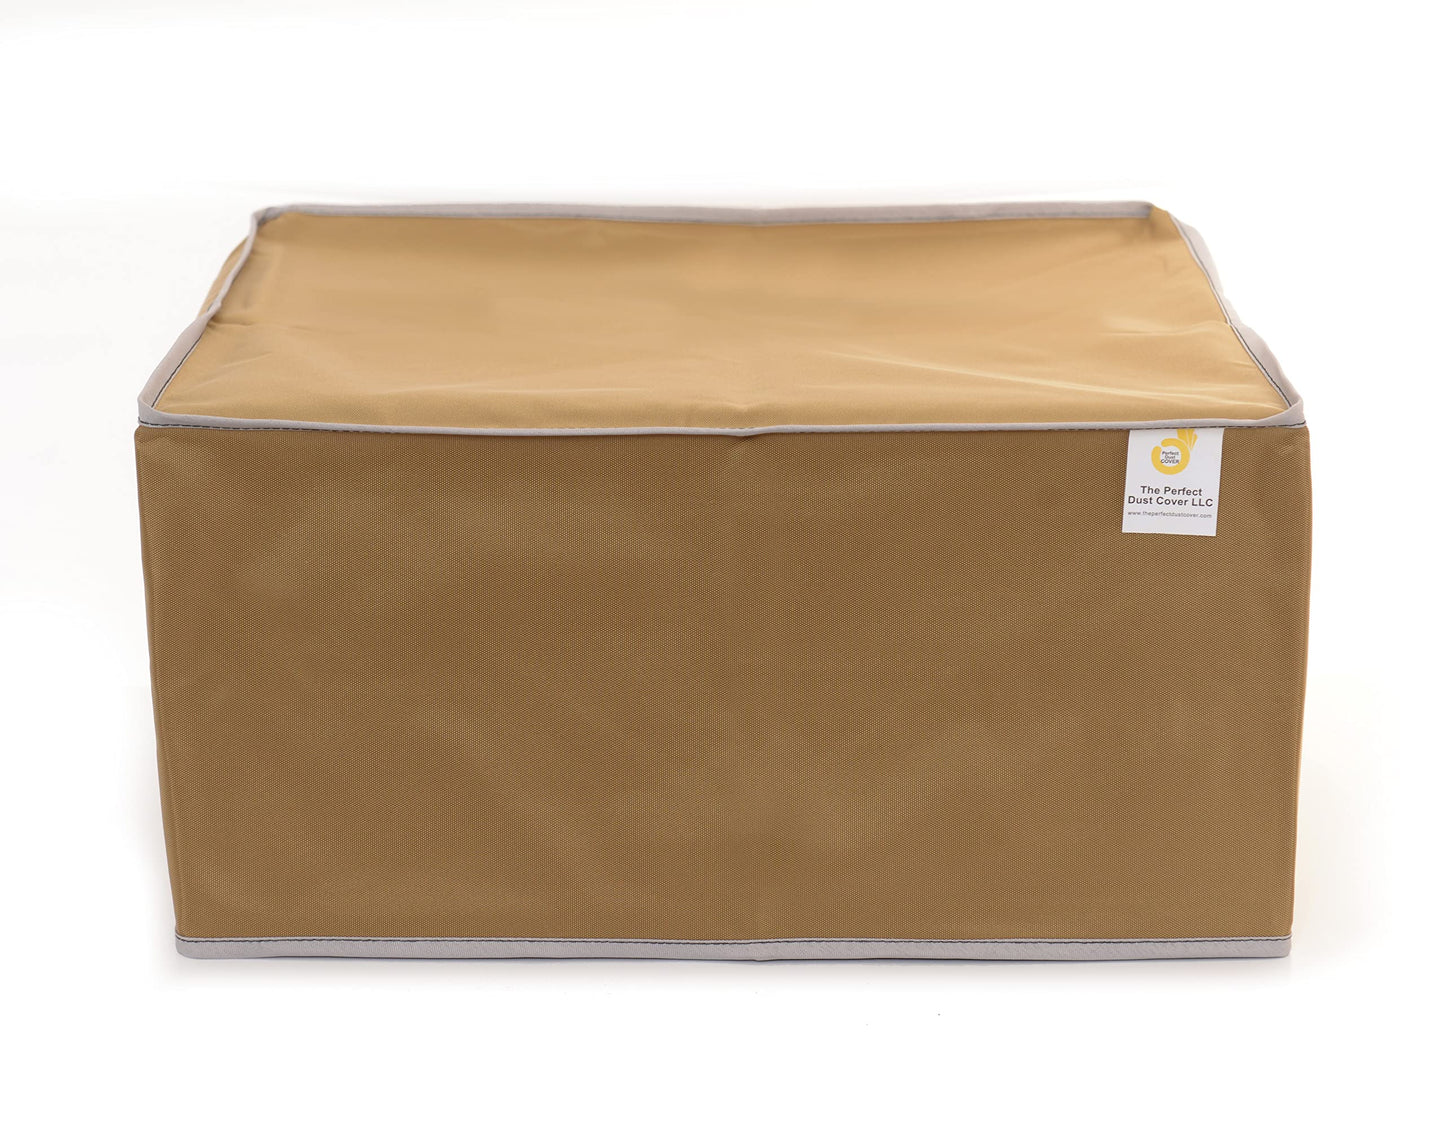 The Perfect Dust Cover, Tan Nylon Cover for Epson Workforce Pro WF-4730 All-in-One Printer, Anti Static and Waterproof Cover Dimensions 16.1''W x 15.3''D x 13''H by The Perfect Dust Cover LLC